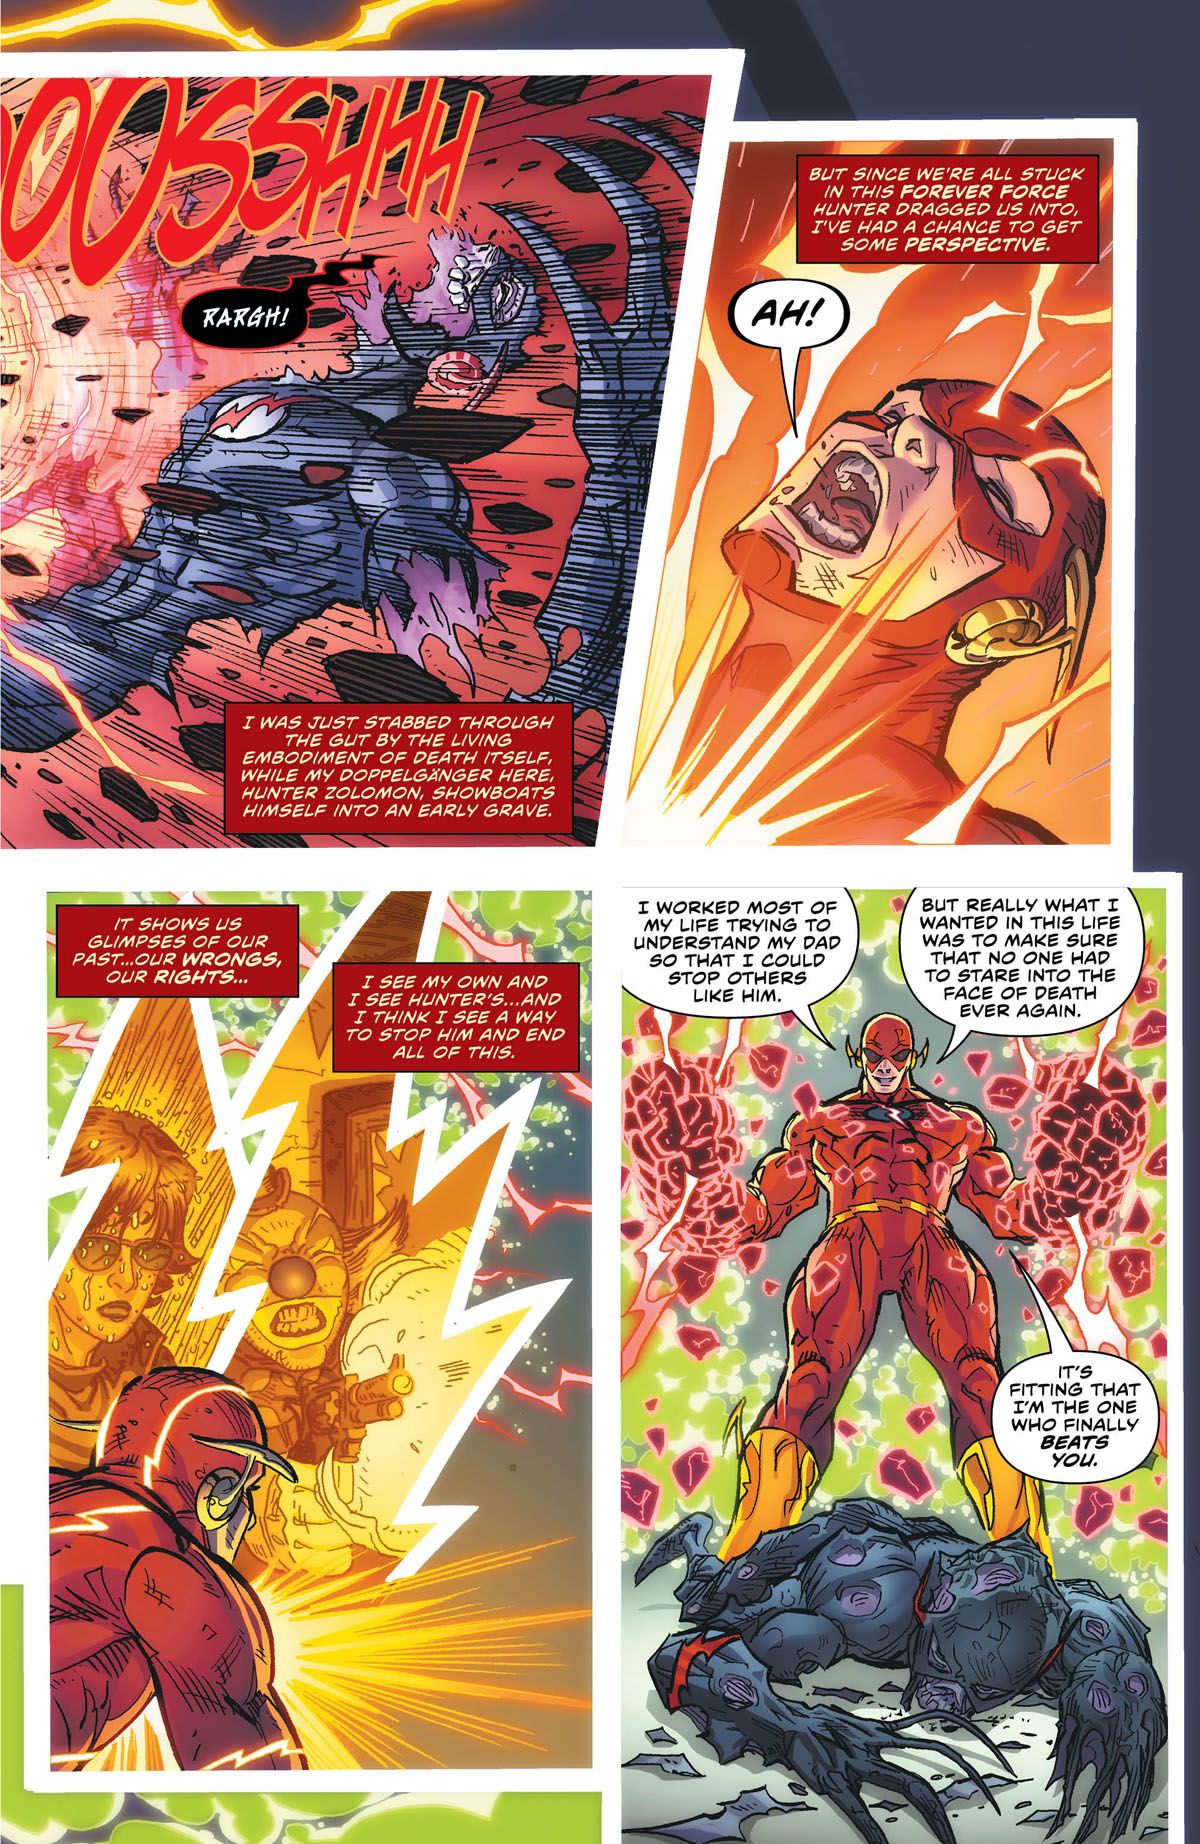 The Flash #81 page 3